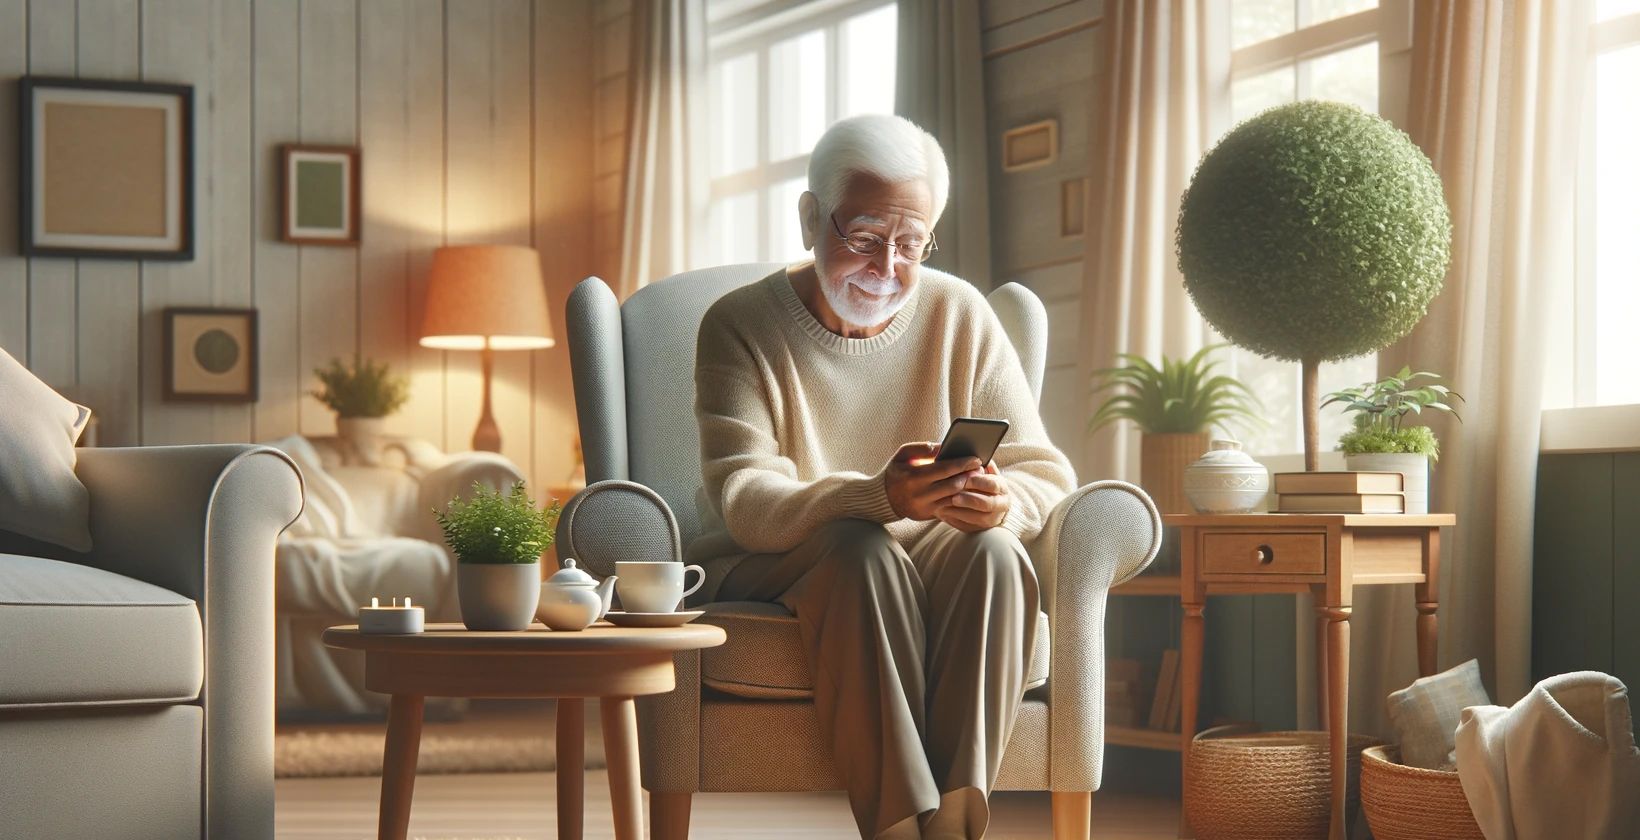 An elderly man using an iPhone in a sunny room.